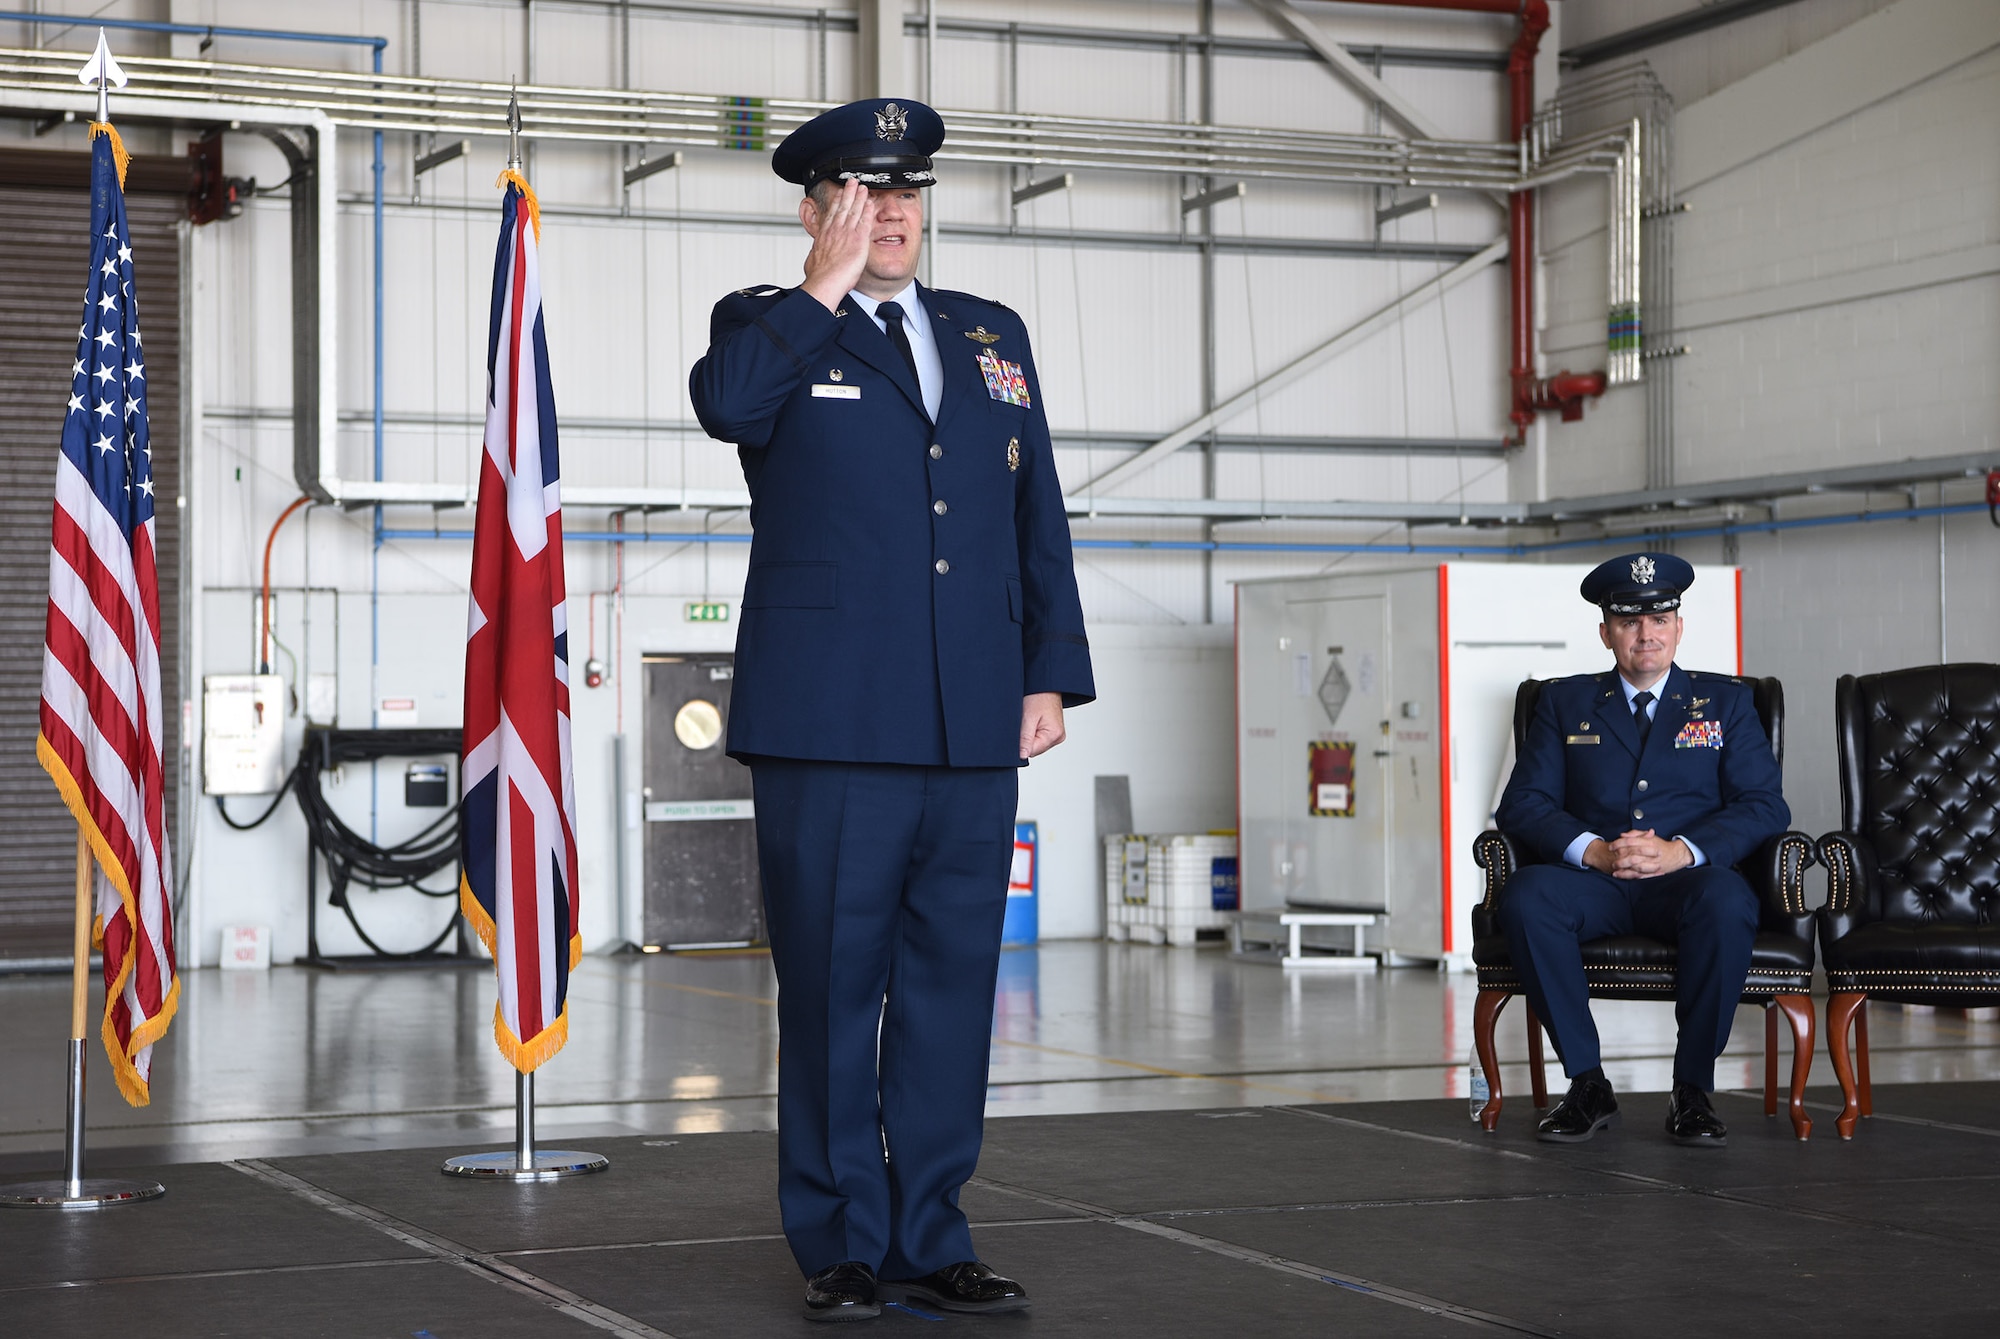 U.S. Air Force Col. Thomas Hutton, 100th Operations Group commander, renders his first salute to Airmen in the 100th OG during a change of command ceremony at Royal Air Force Mildenhall, England, June 16, 2022. Hutton joins the 100th Air Refueling Wing from Ramstein Air Base, Germany, and is a command pilot with more than 3,000 flying hours in tanker and trainer aircraft. (U.S. Air Force photo by Karen Abeyasekere)